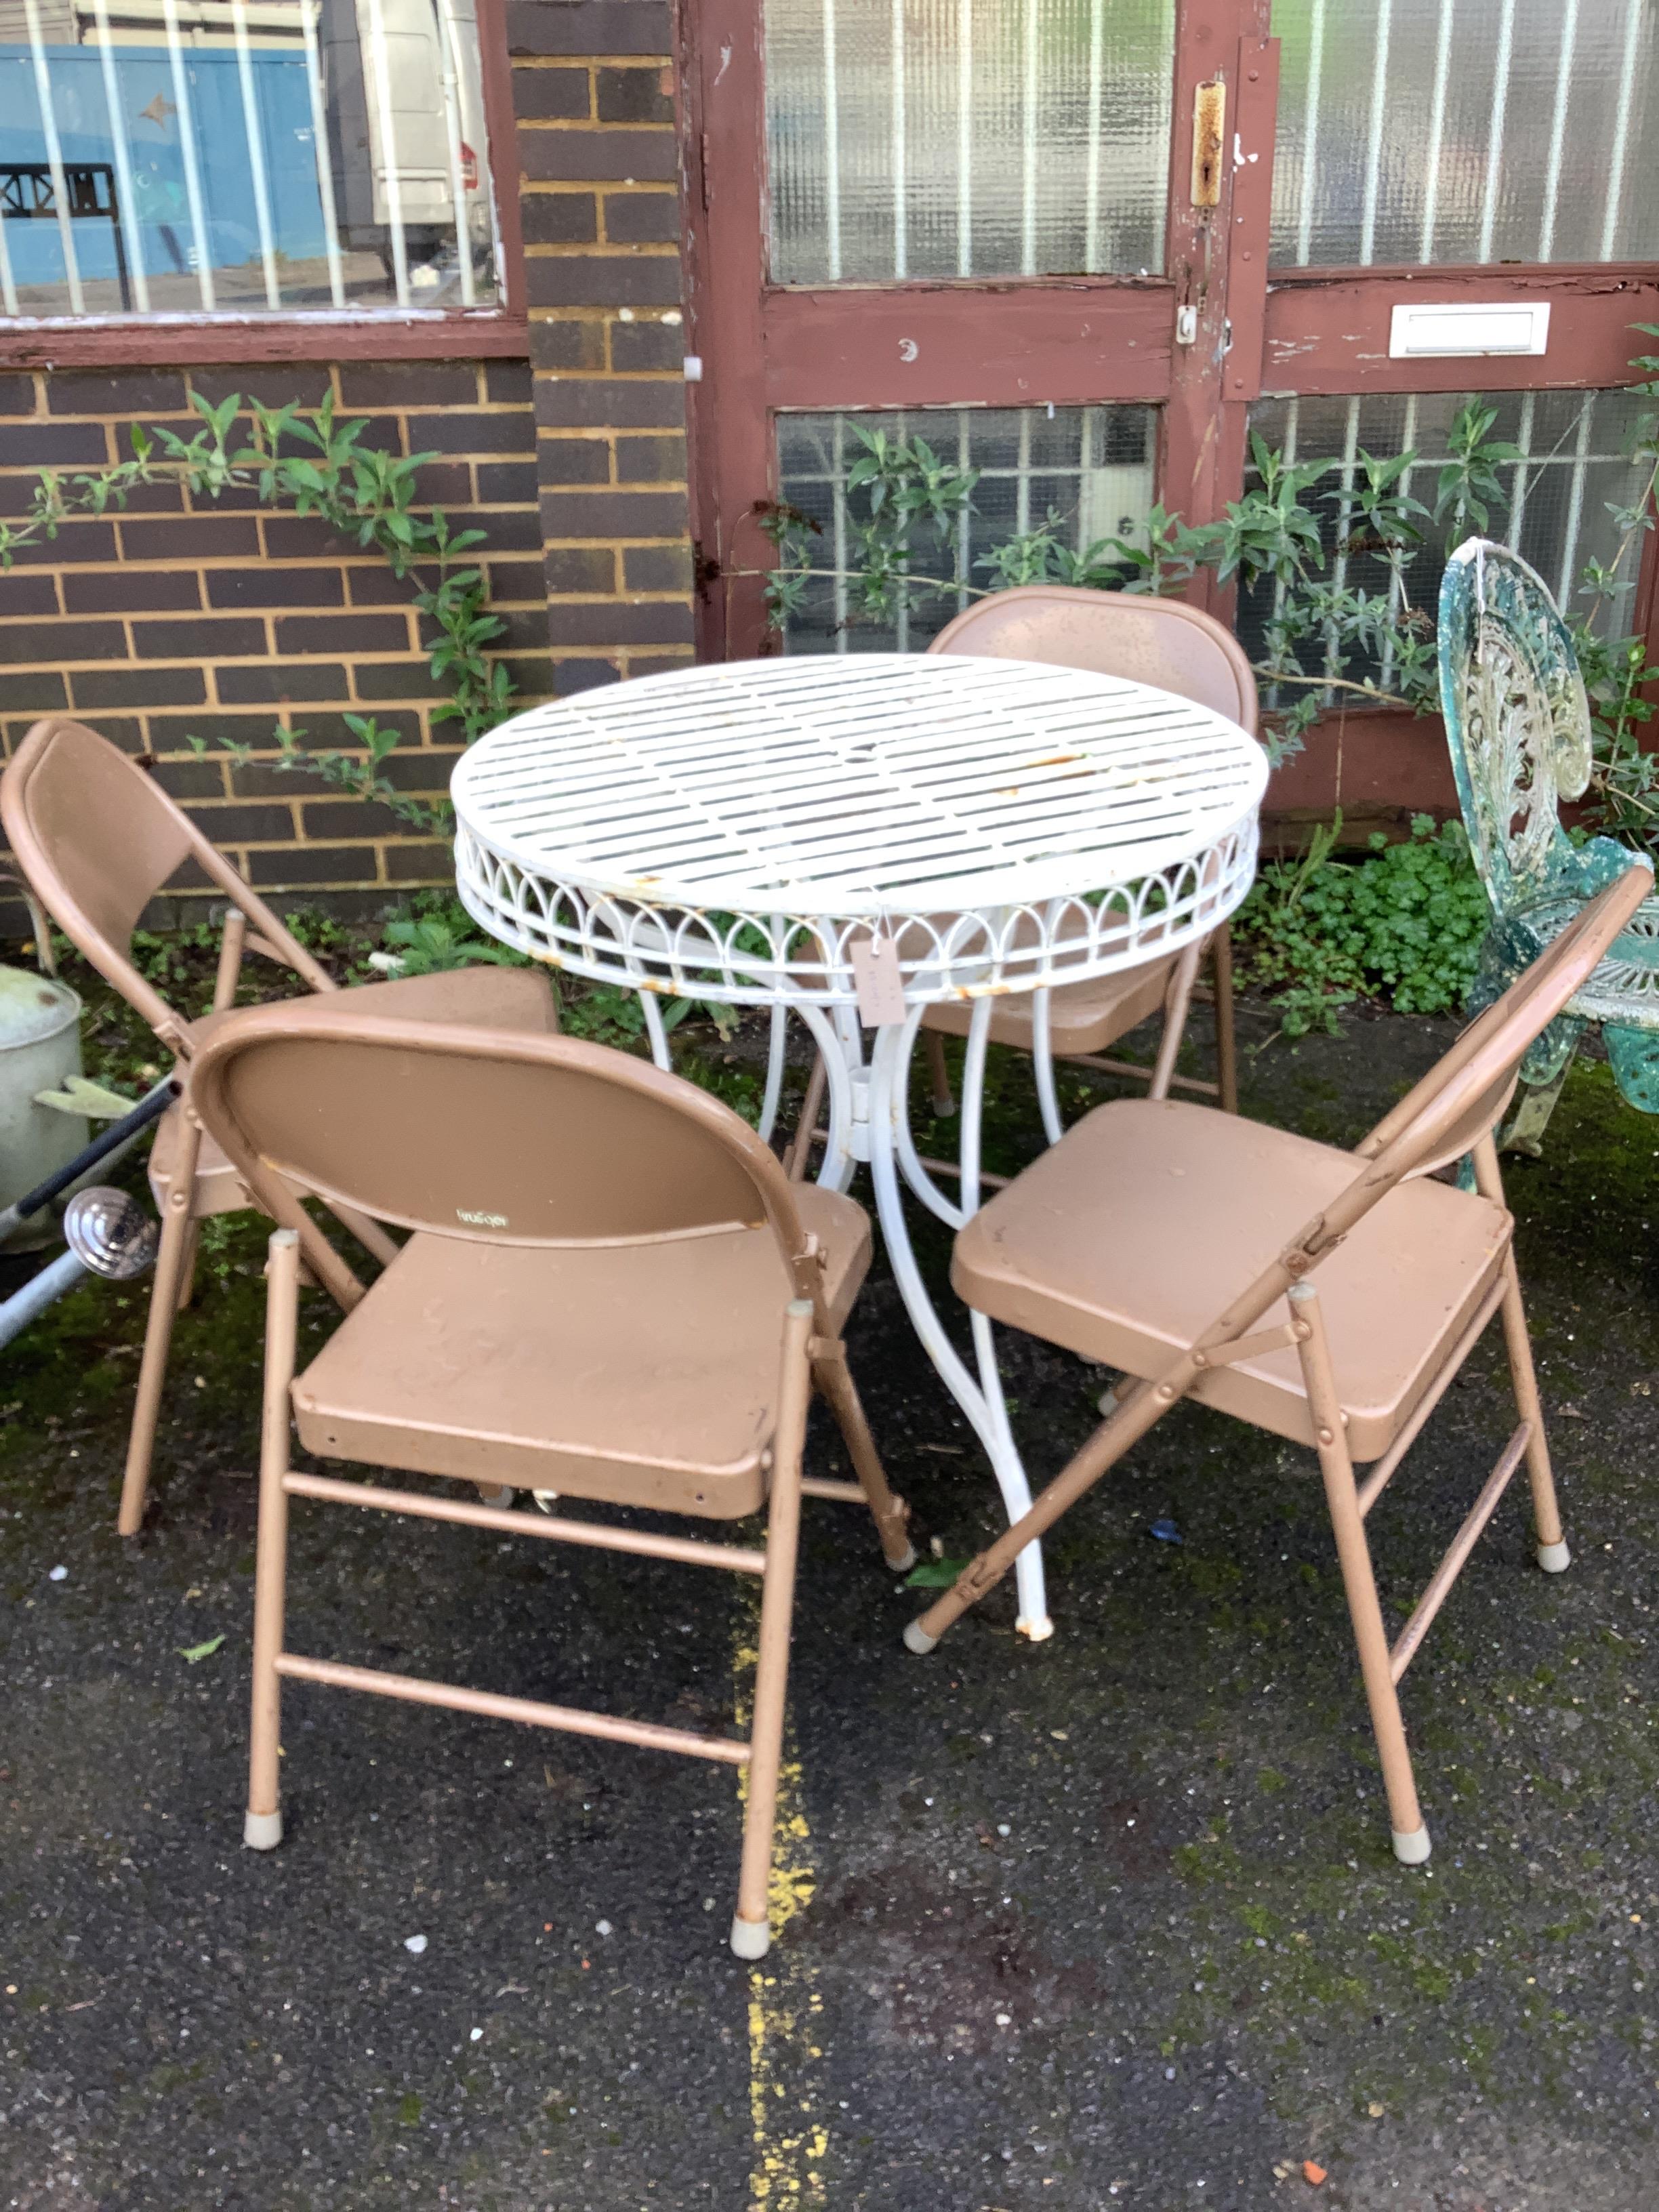 A circular metal garden table, diameter 75cm, height 76cm, together with four metal folding chairs